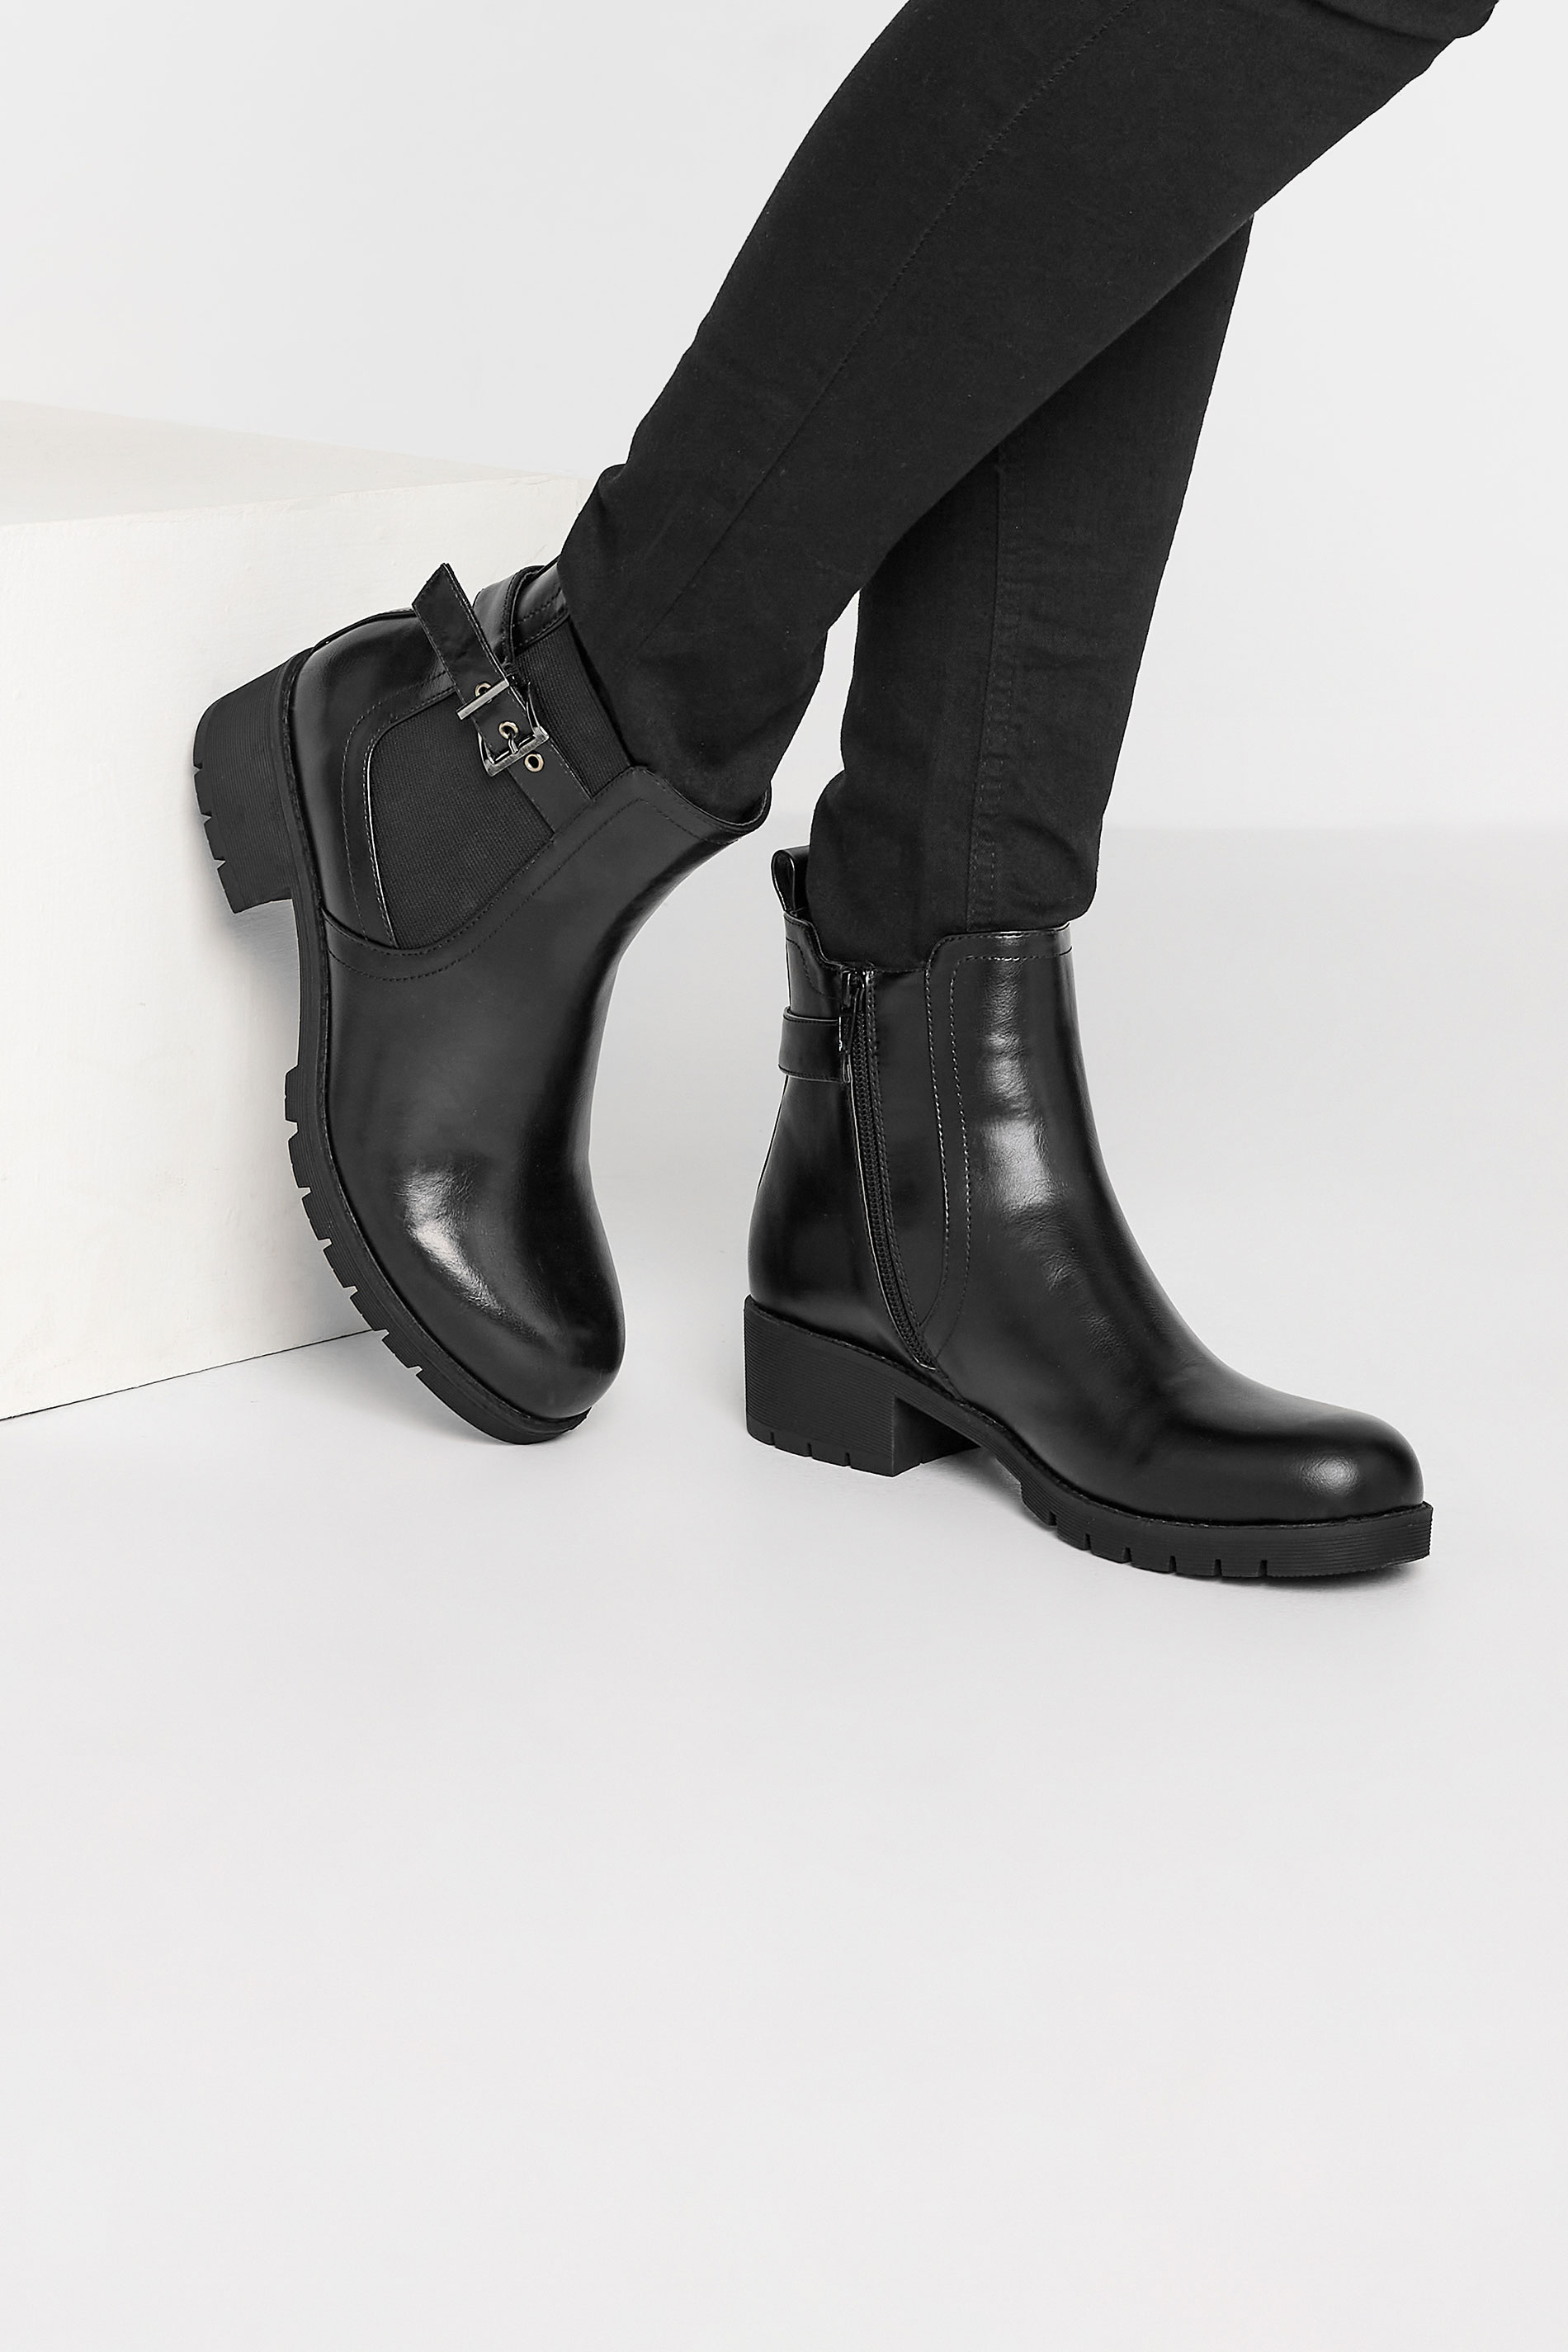 LTS Black Buckle Ankle Boots In Standard D Fit | Long Tall Sally 1